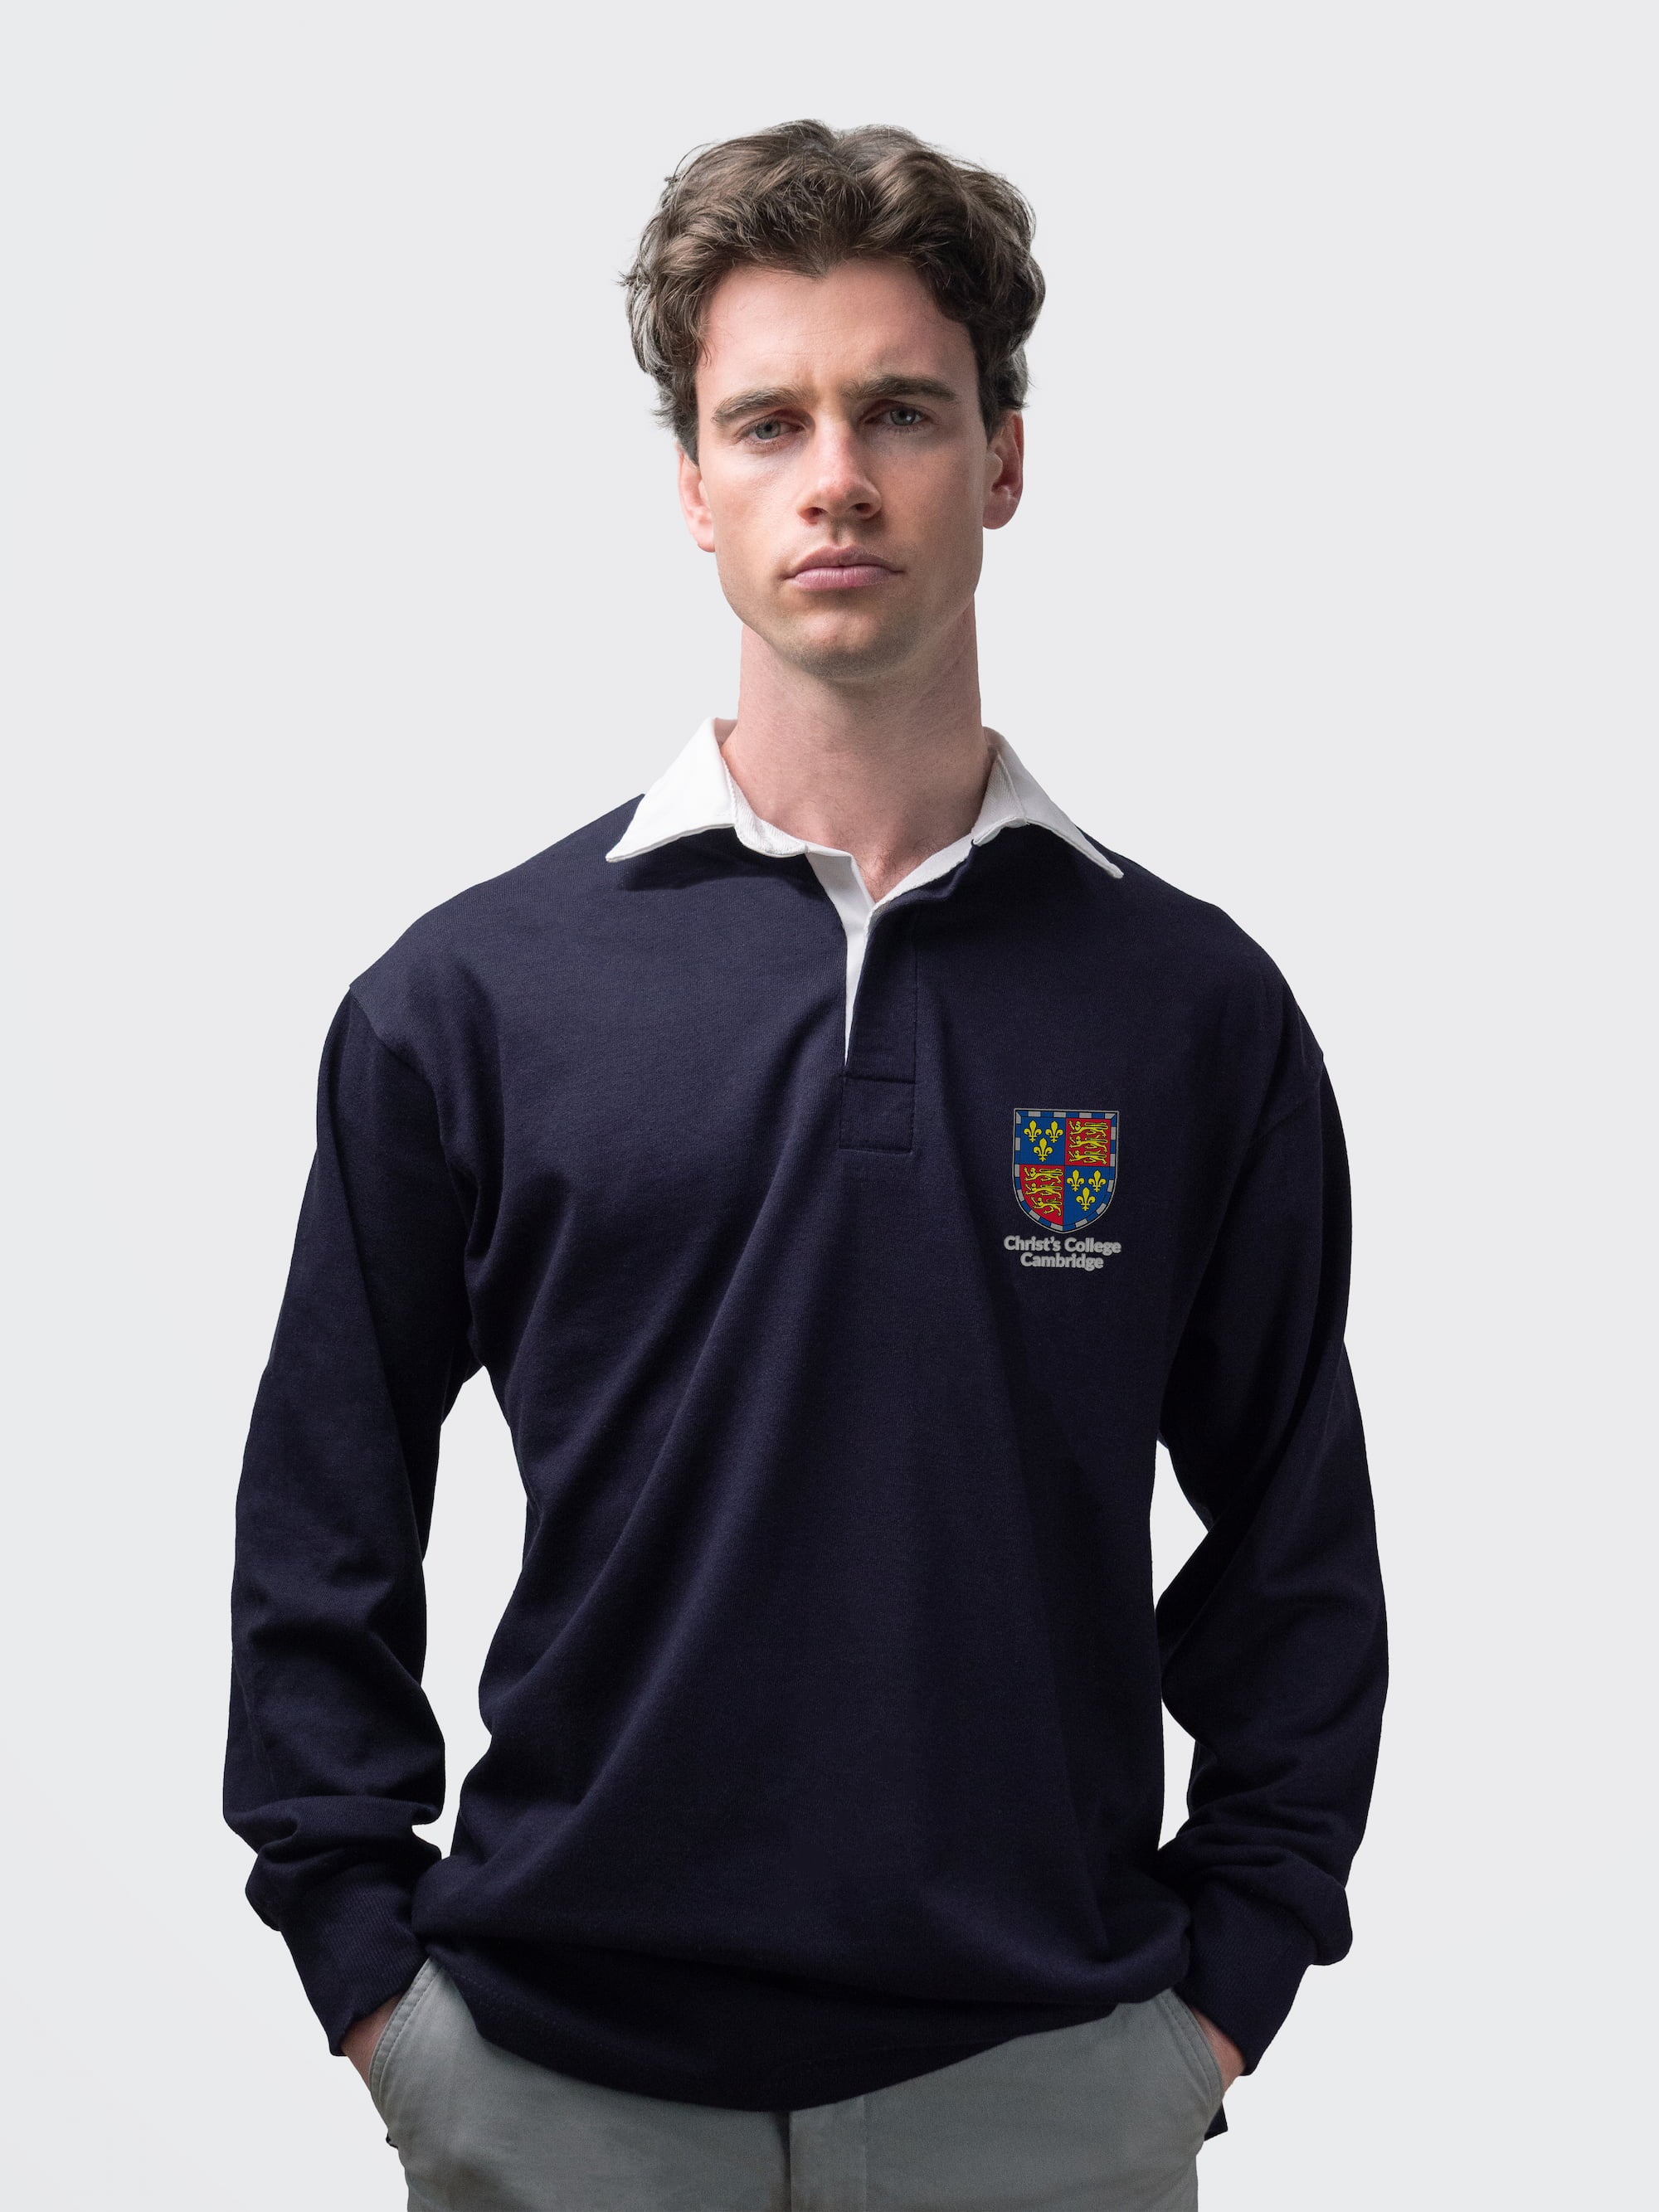 Christ's student wearing an embroidered mens rugby shirt in navy